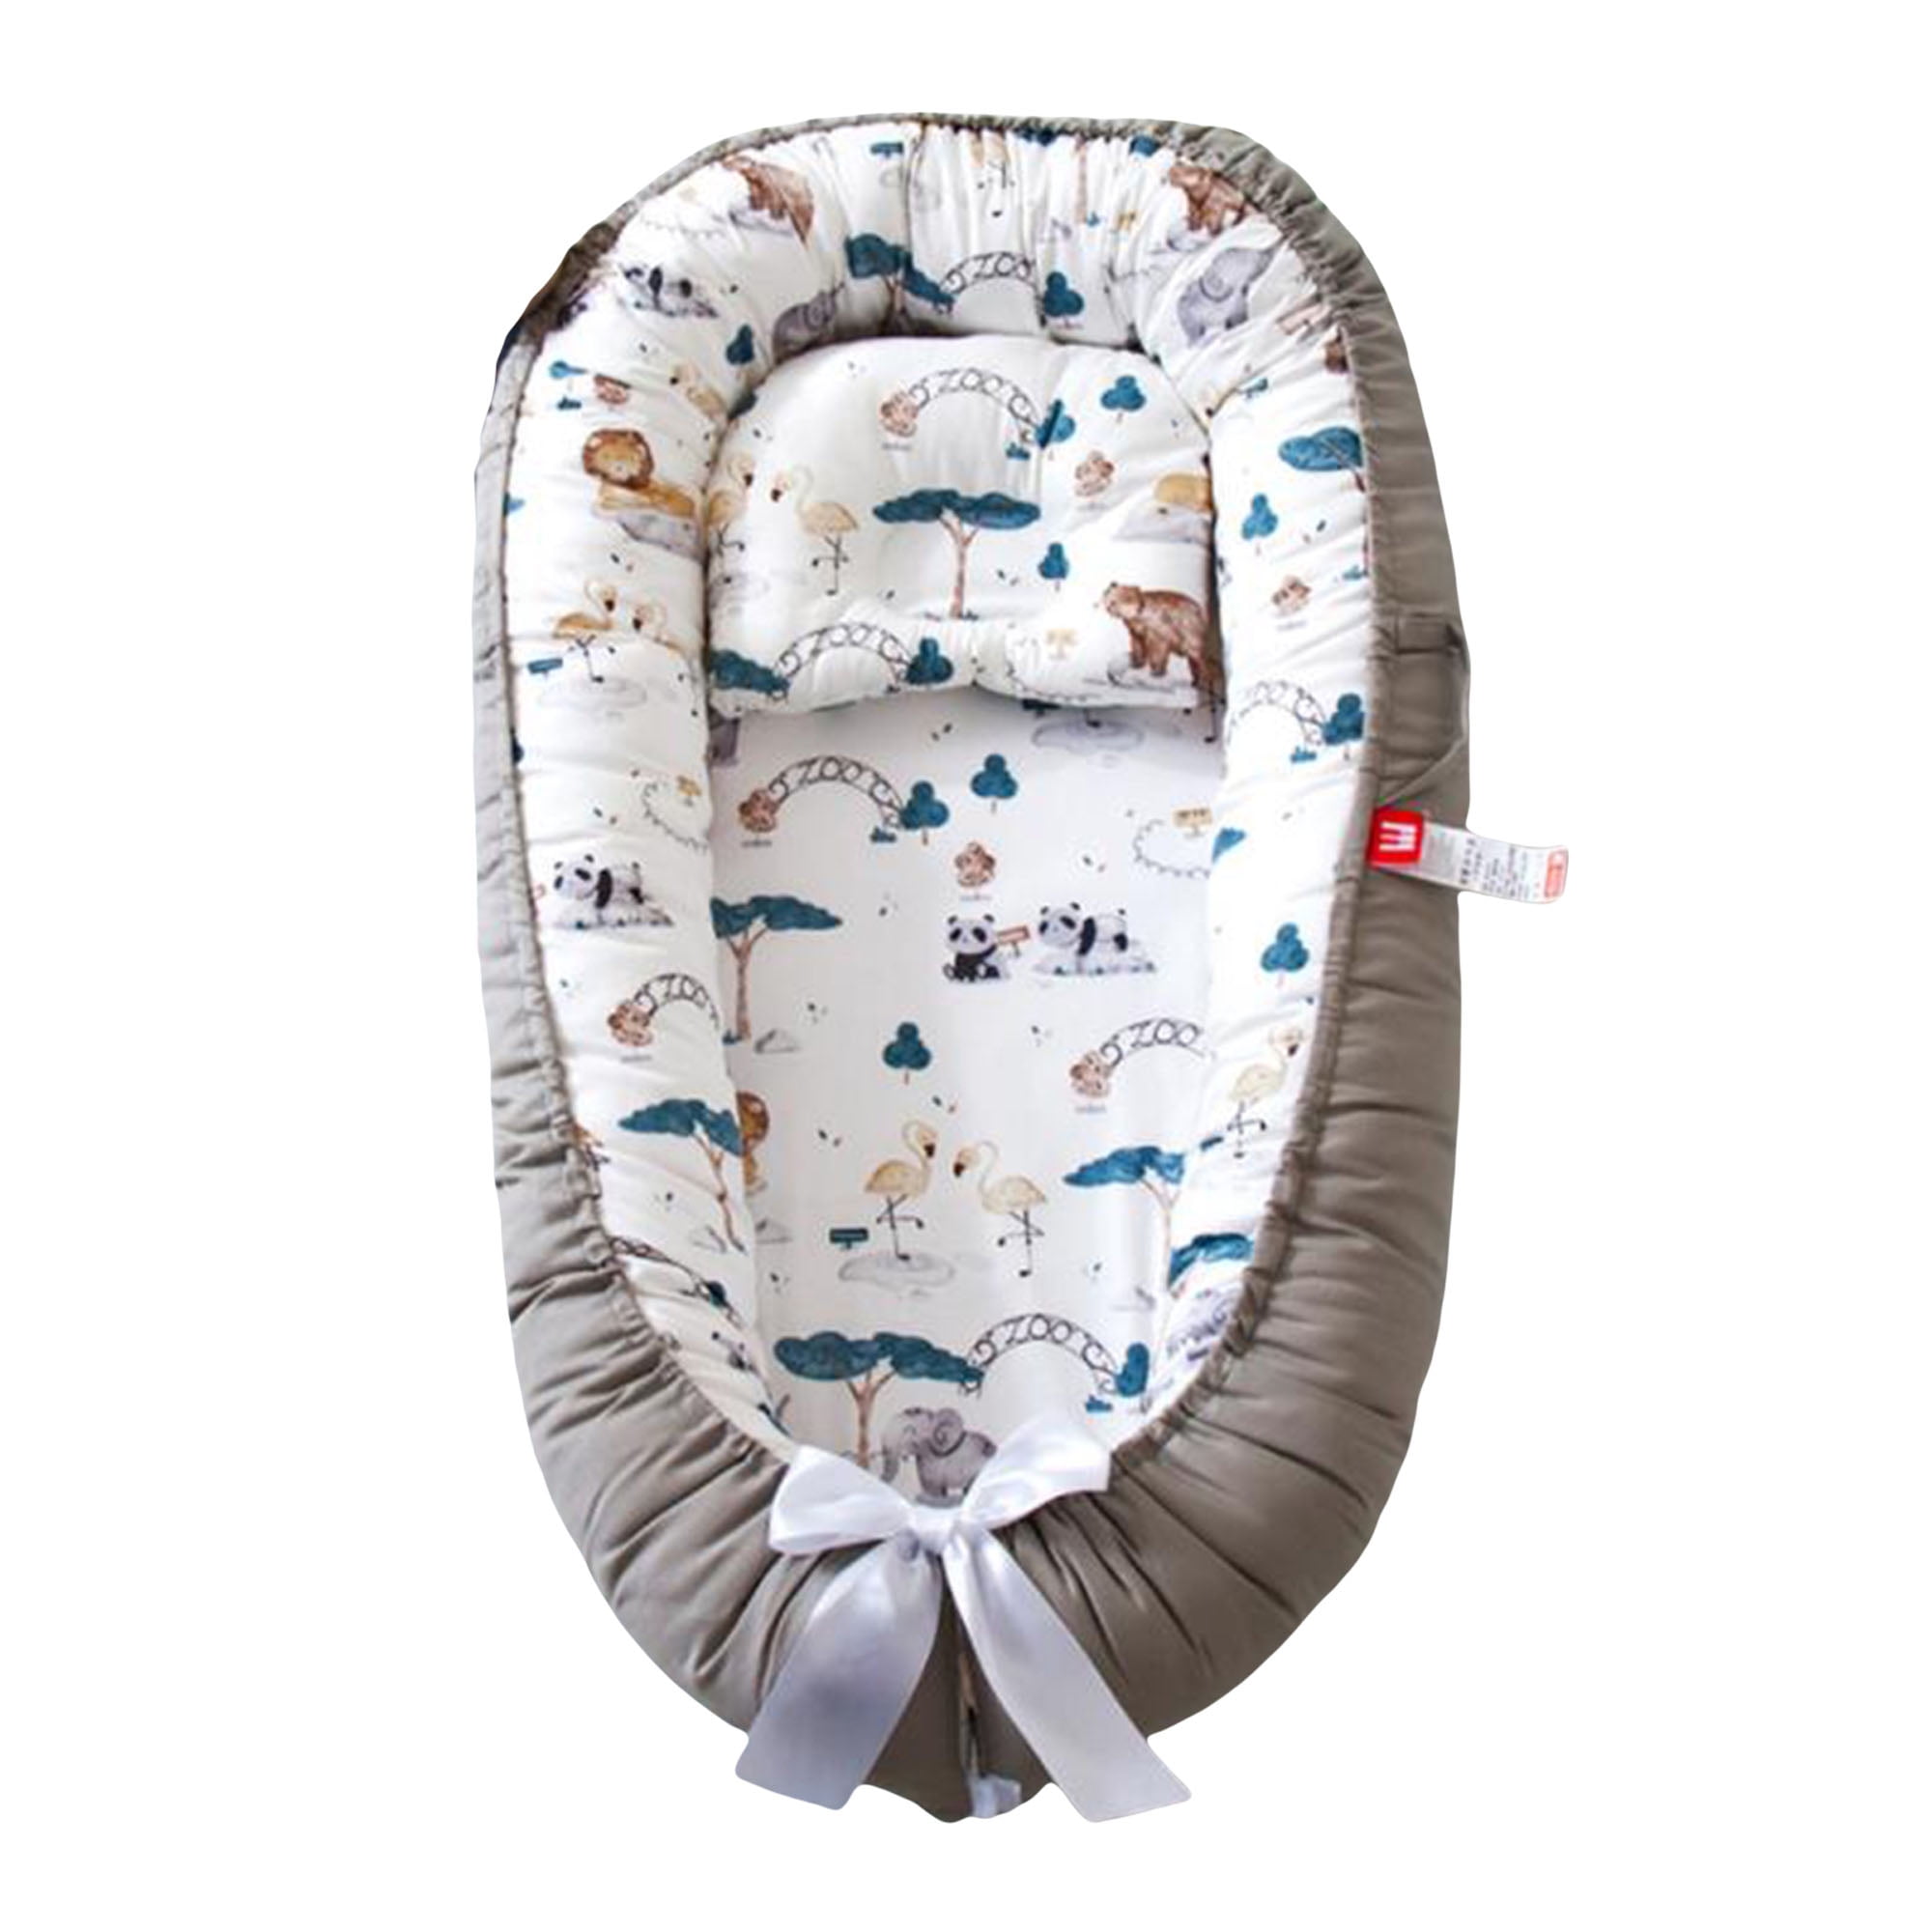 Breathable & Hypoallergenic Co-Sleeping Baby Bed 100% Cotton Portable Crib for Bedroom/Travel Blue Baby Lounger Abreeze Baby Bassinet for Bed -Starfish 